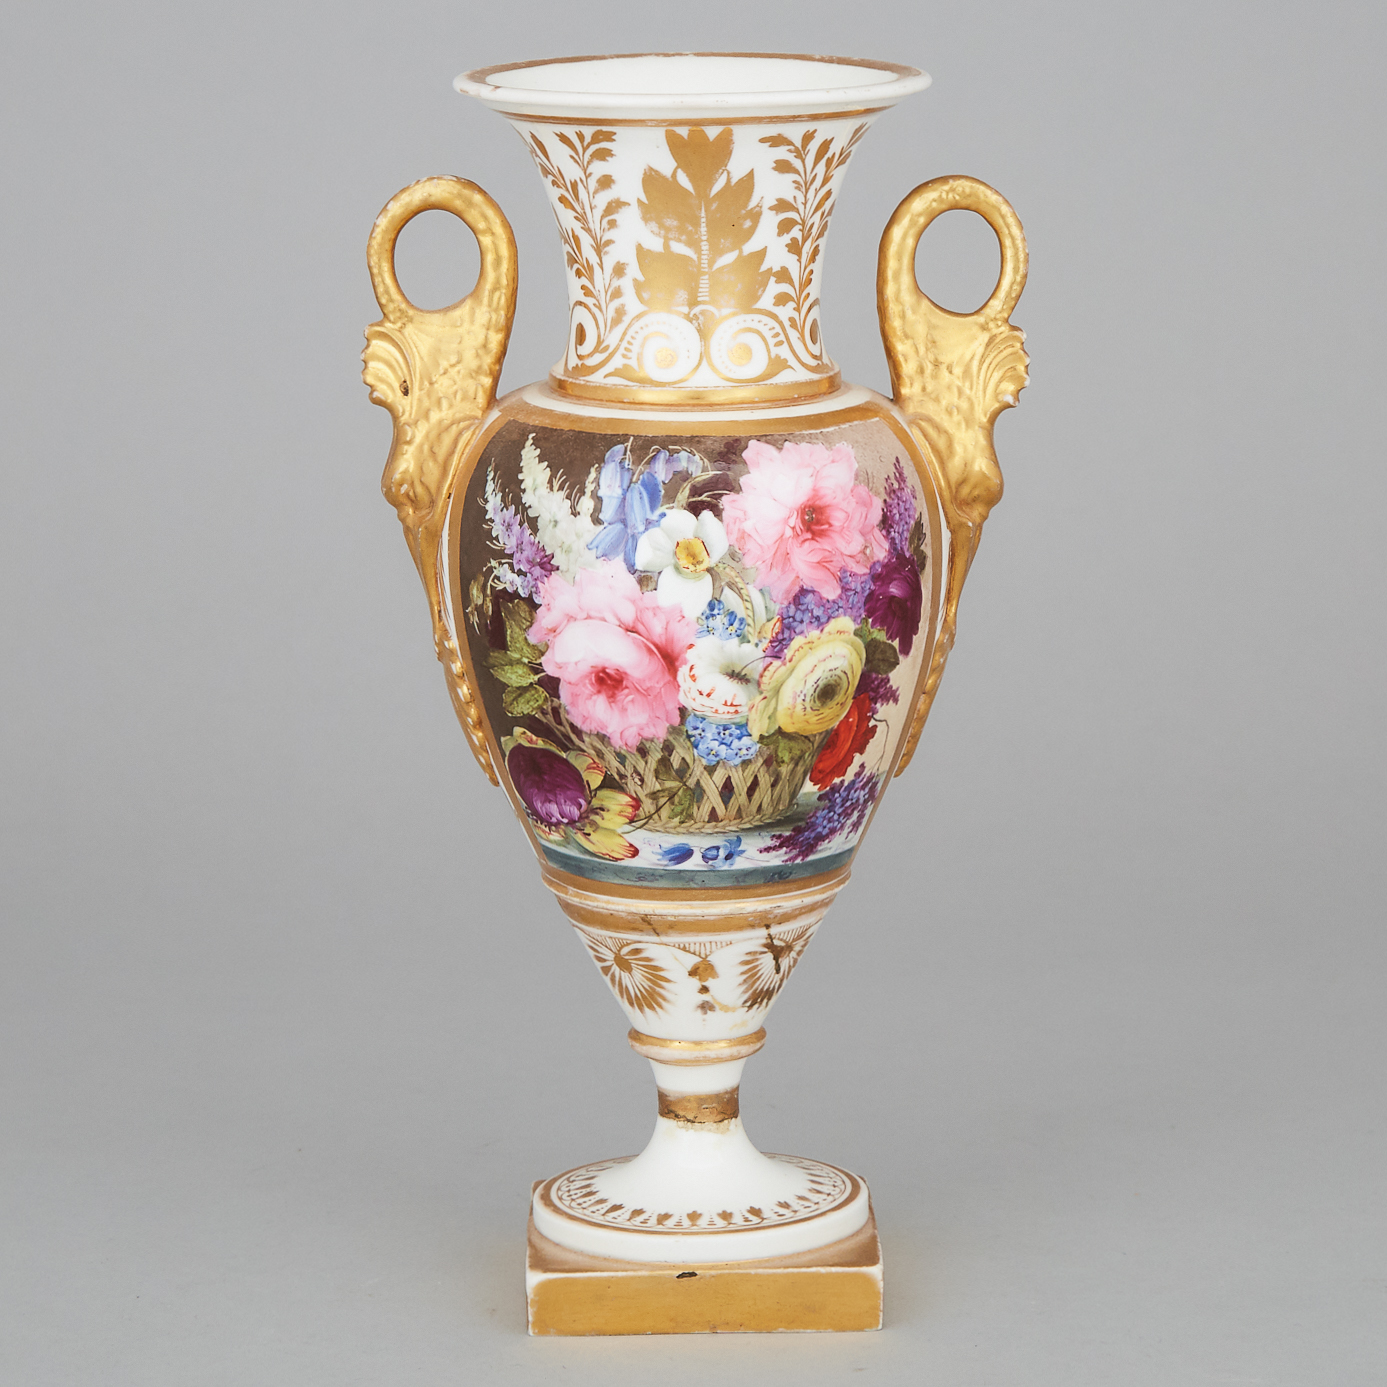 English Porcelain Floral and Gilt Decorated Two-Handled Vase, early 19th century